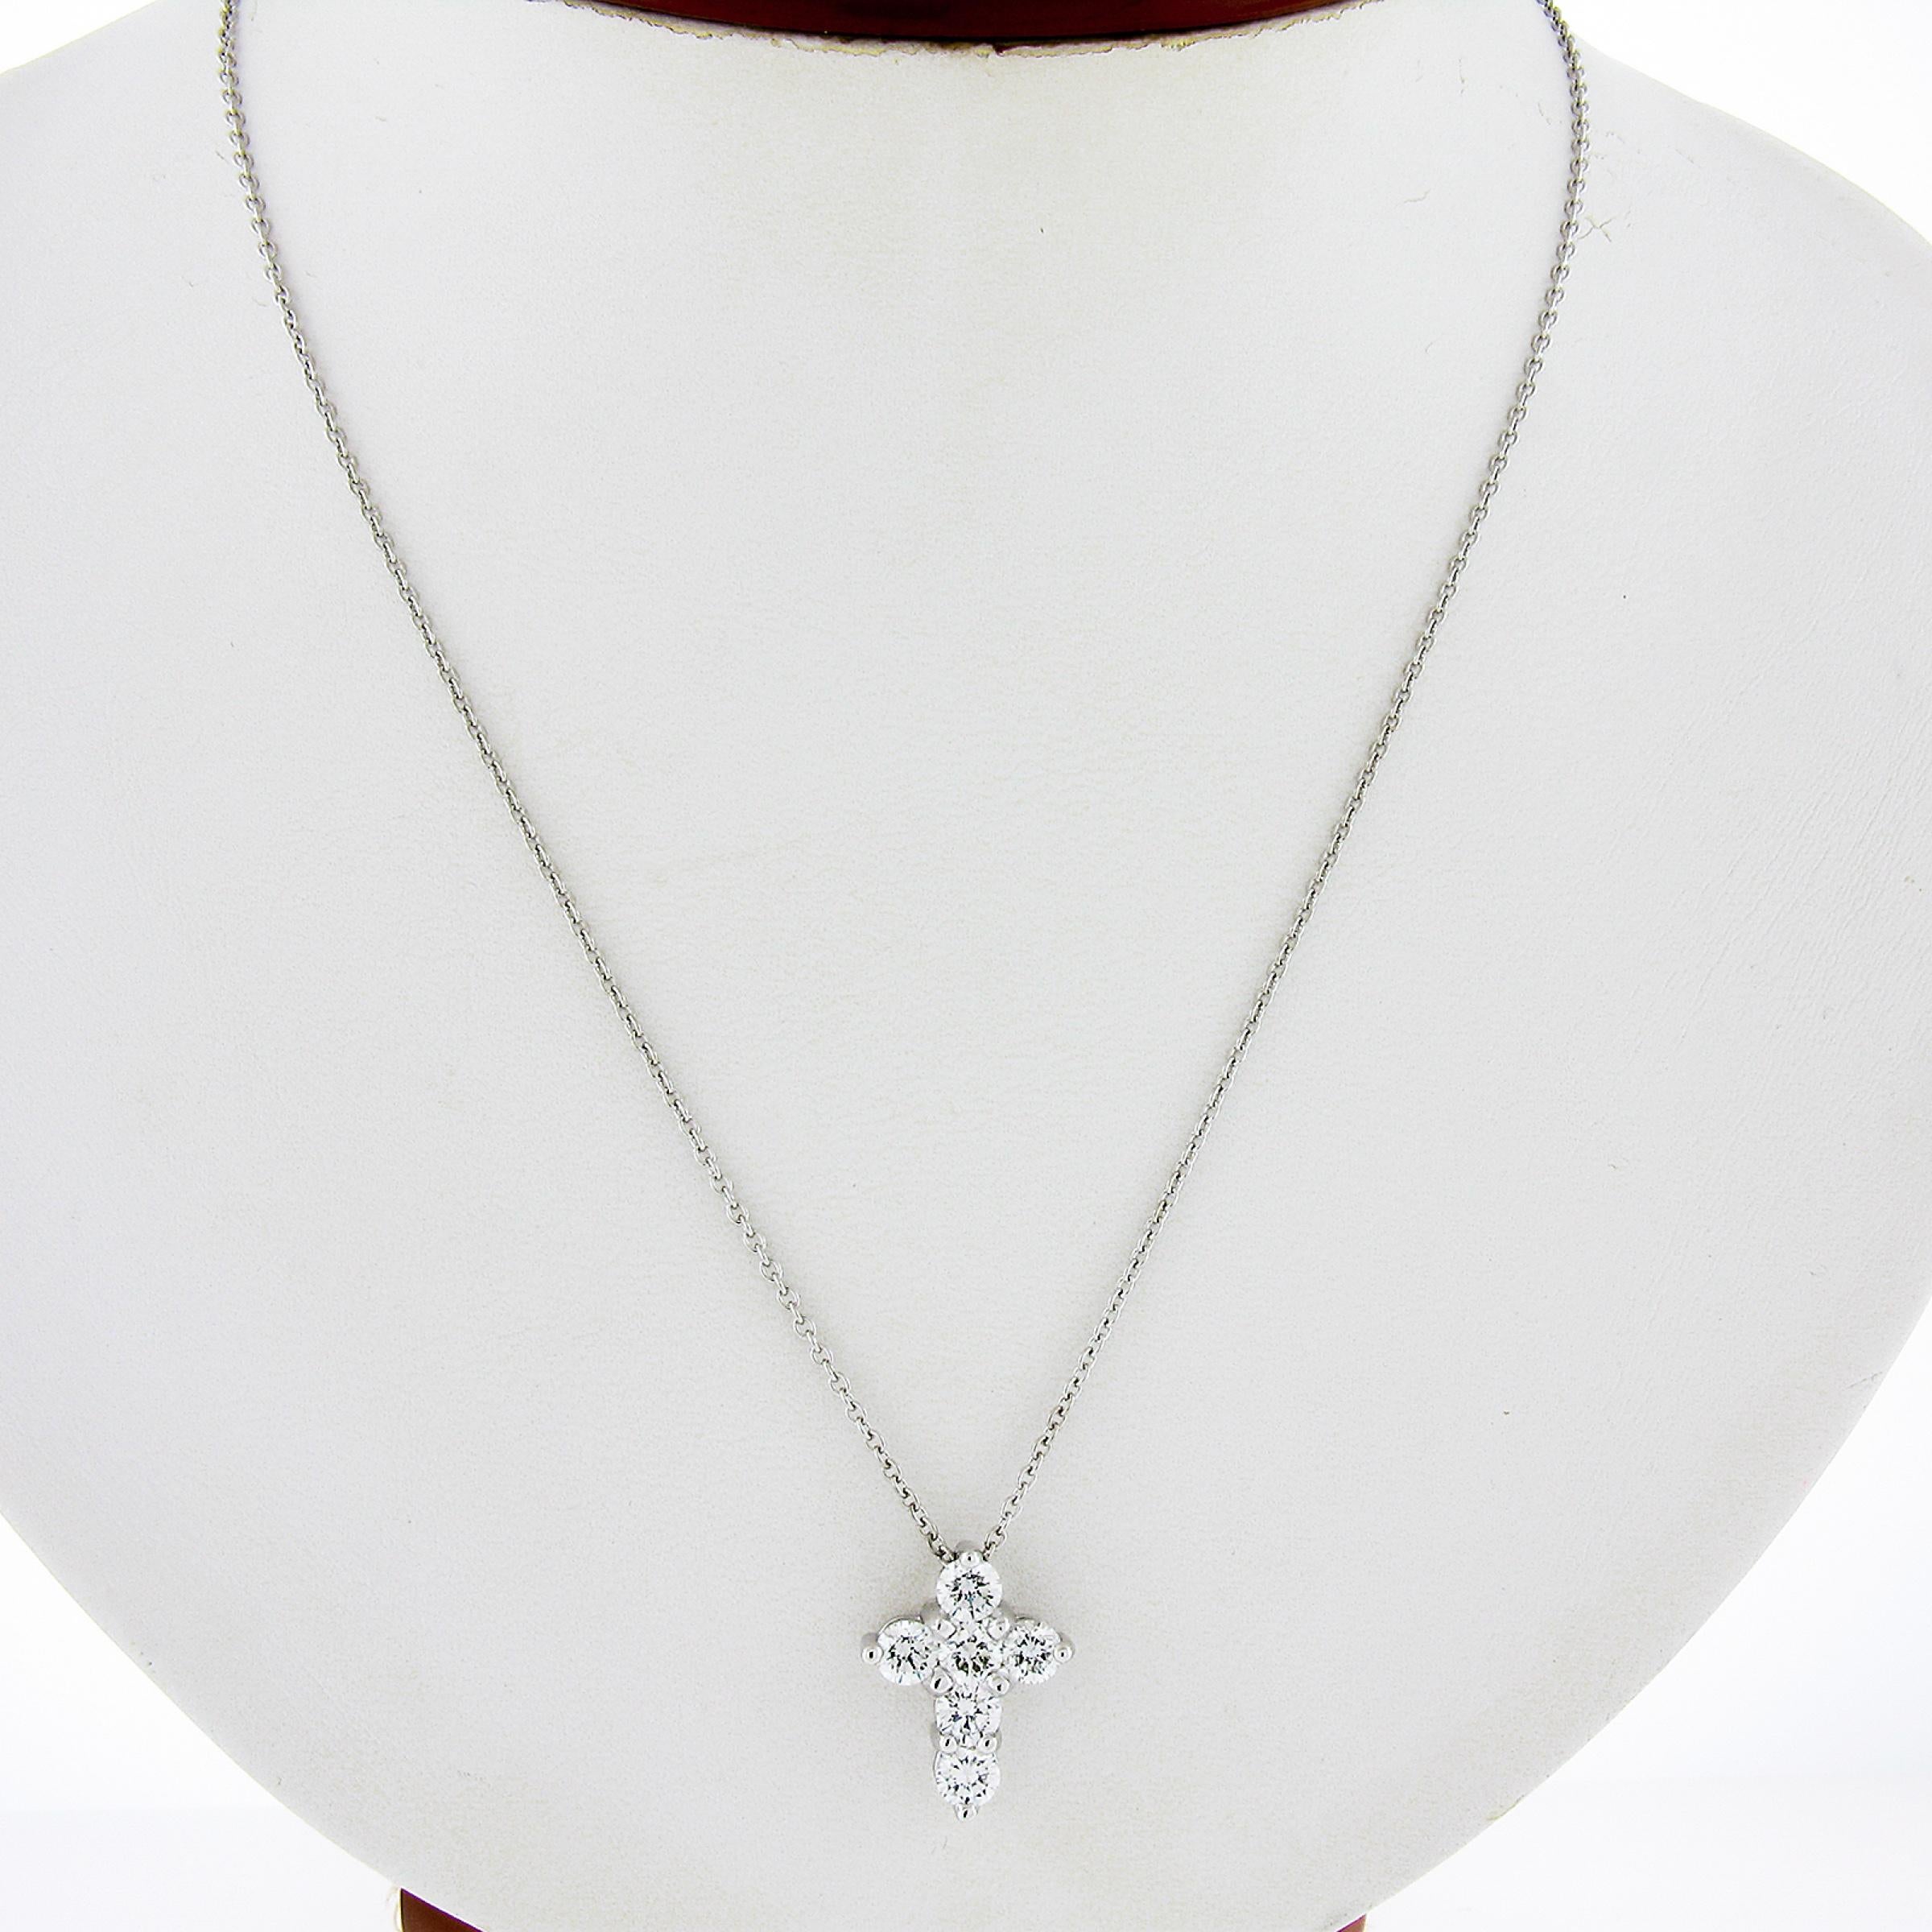 This new elegant very well made diamond cross pendant is crafted in solid platinum. It features a lovely meaty design with the high quality nice large diamonds weighing exactly 1.53ctw. This pendant slides on an adjustable 16 or 18 inch cable link